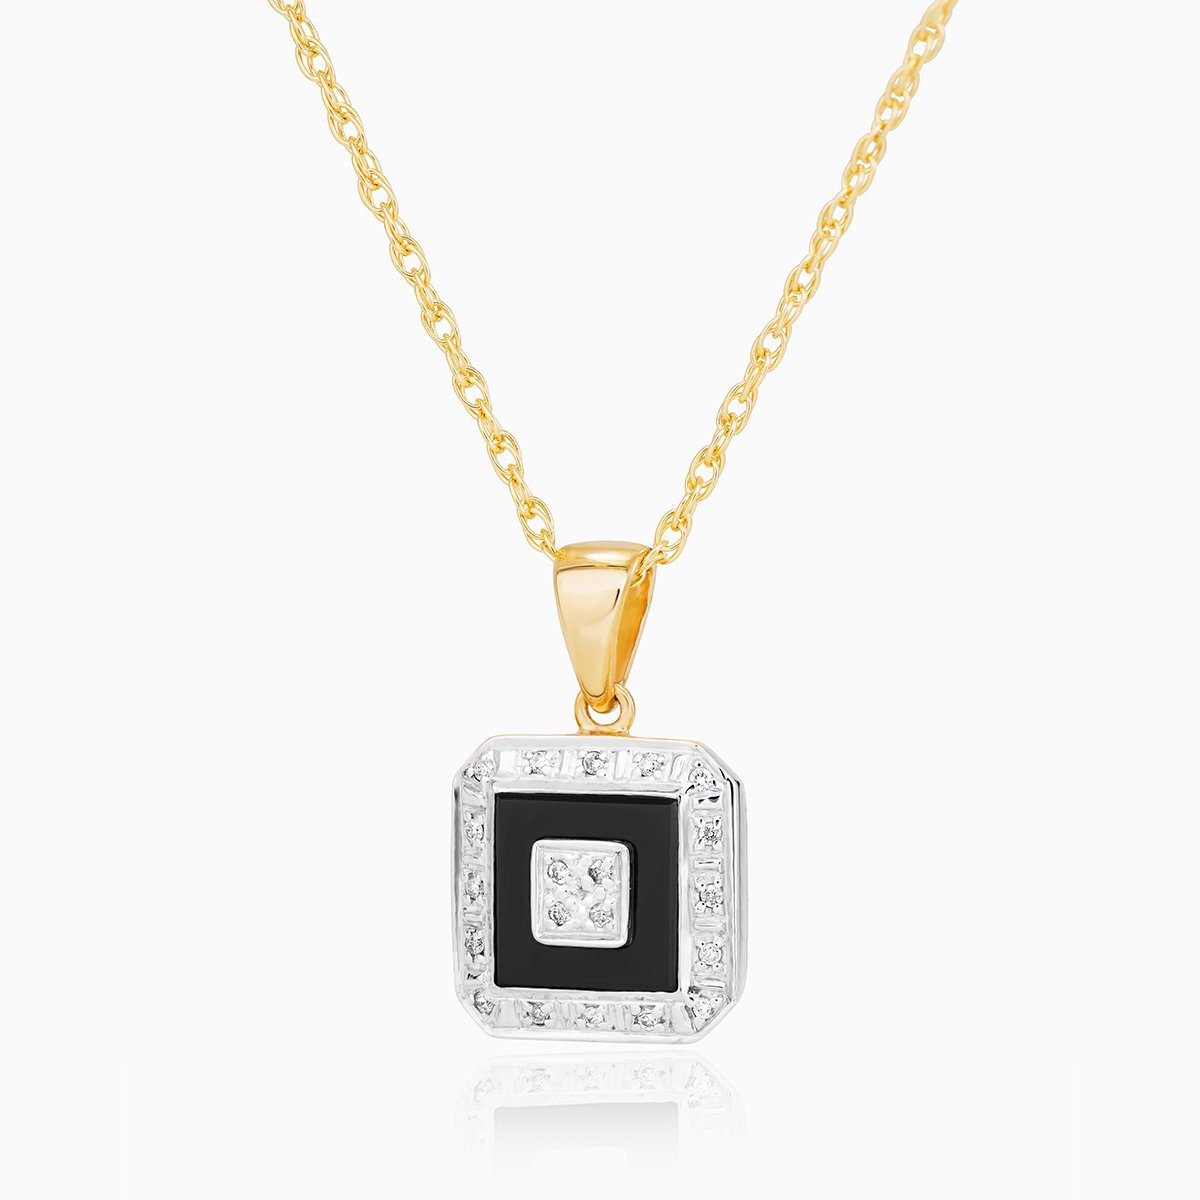 9 ct gold square locket set with diamonds and onyx on a 9 ct gold rope chain